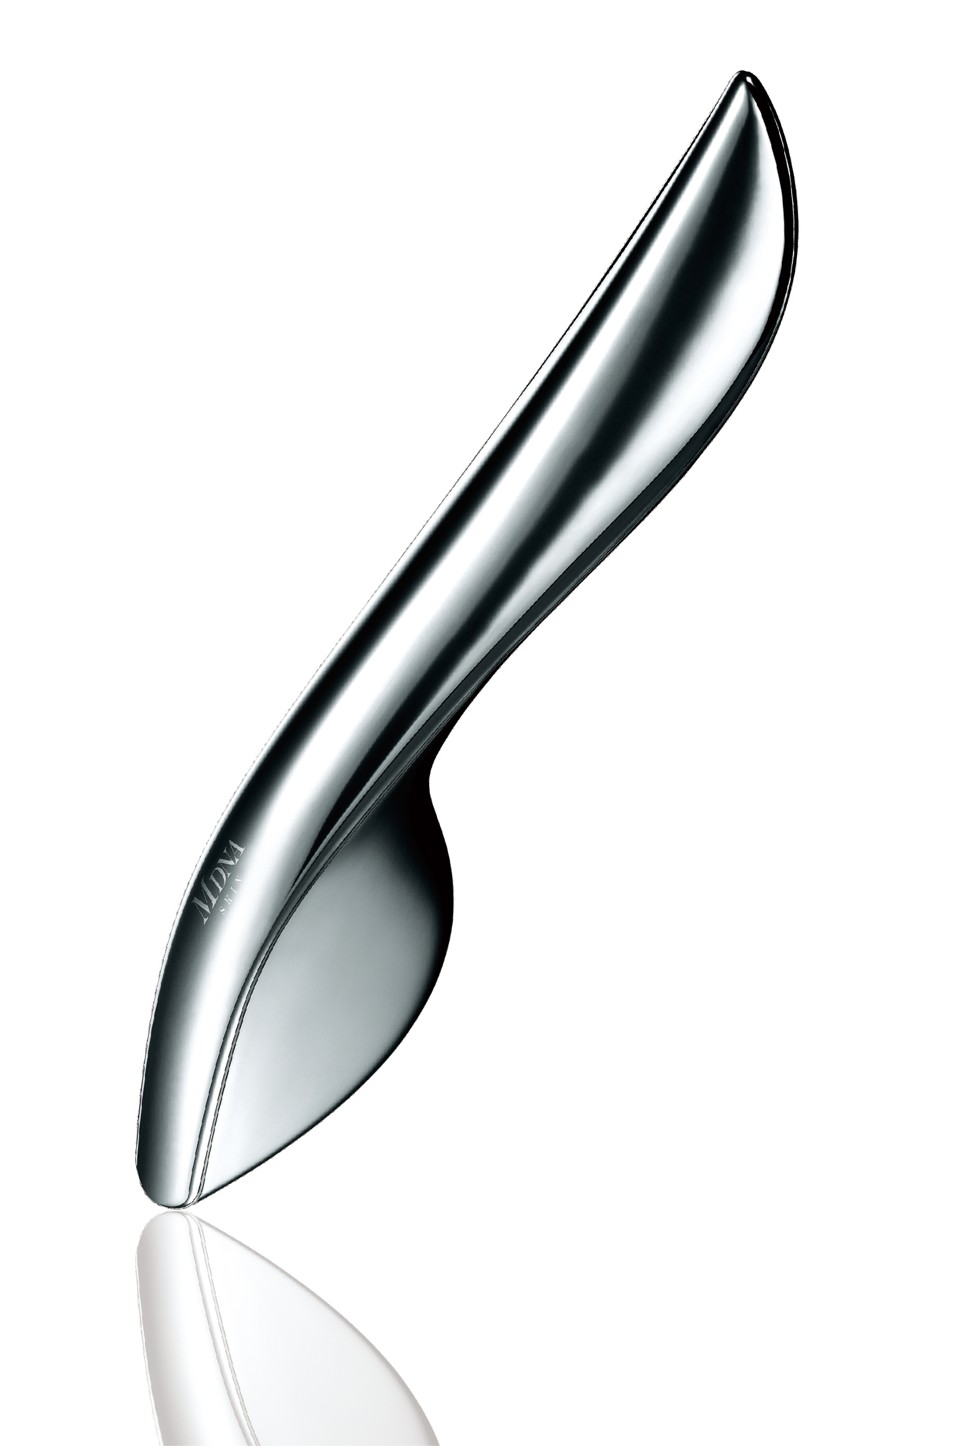 The applicator’s magnetic qualities lifts the mask thoroughly from the skin and stimulates the skin’s keratin layer.